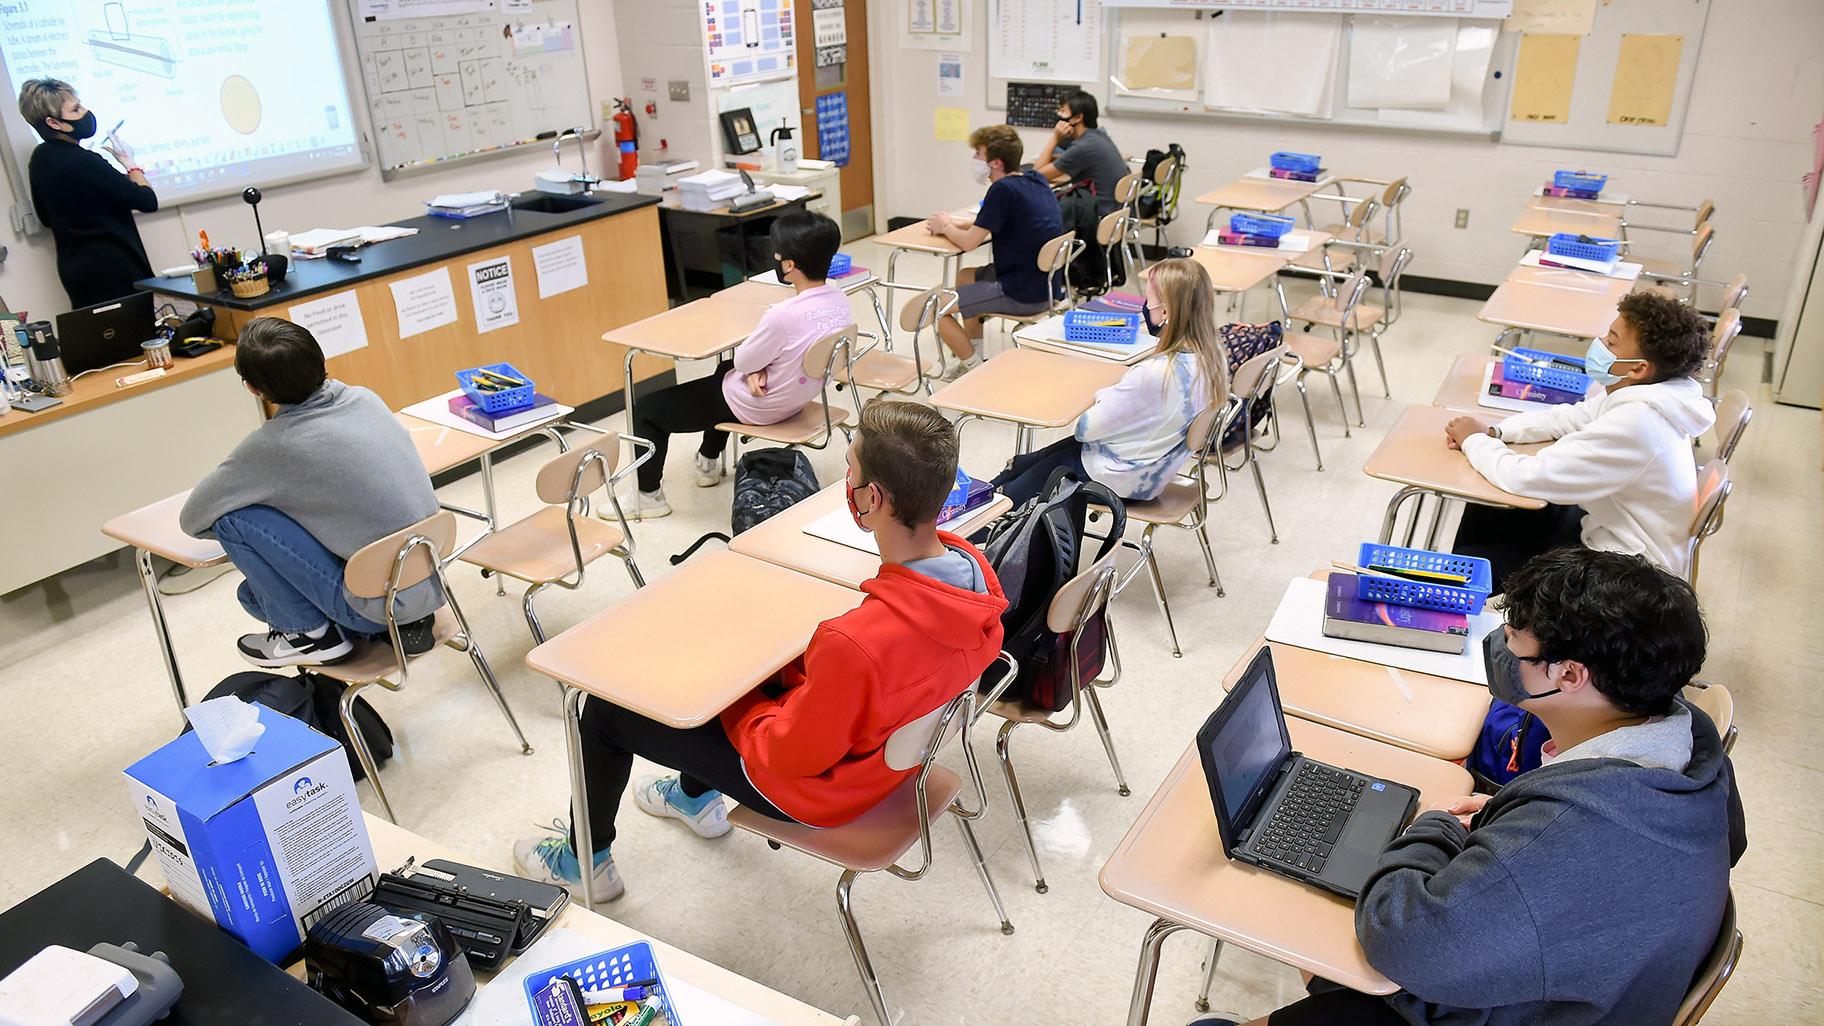 Desks in the classroom are doubled to provide extra spacing at Wilson High School in West Lawn, Pennsylvania, on October 22, 2020. (Ben Hasty / Getty Images)